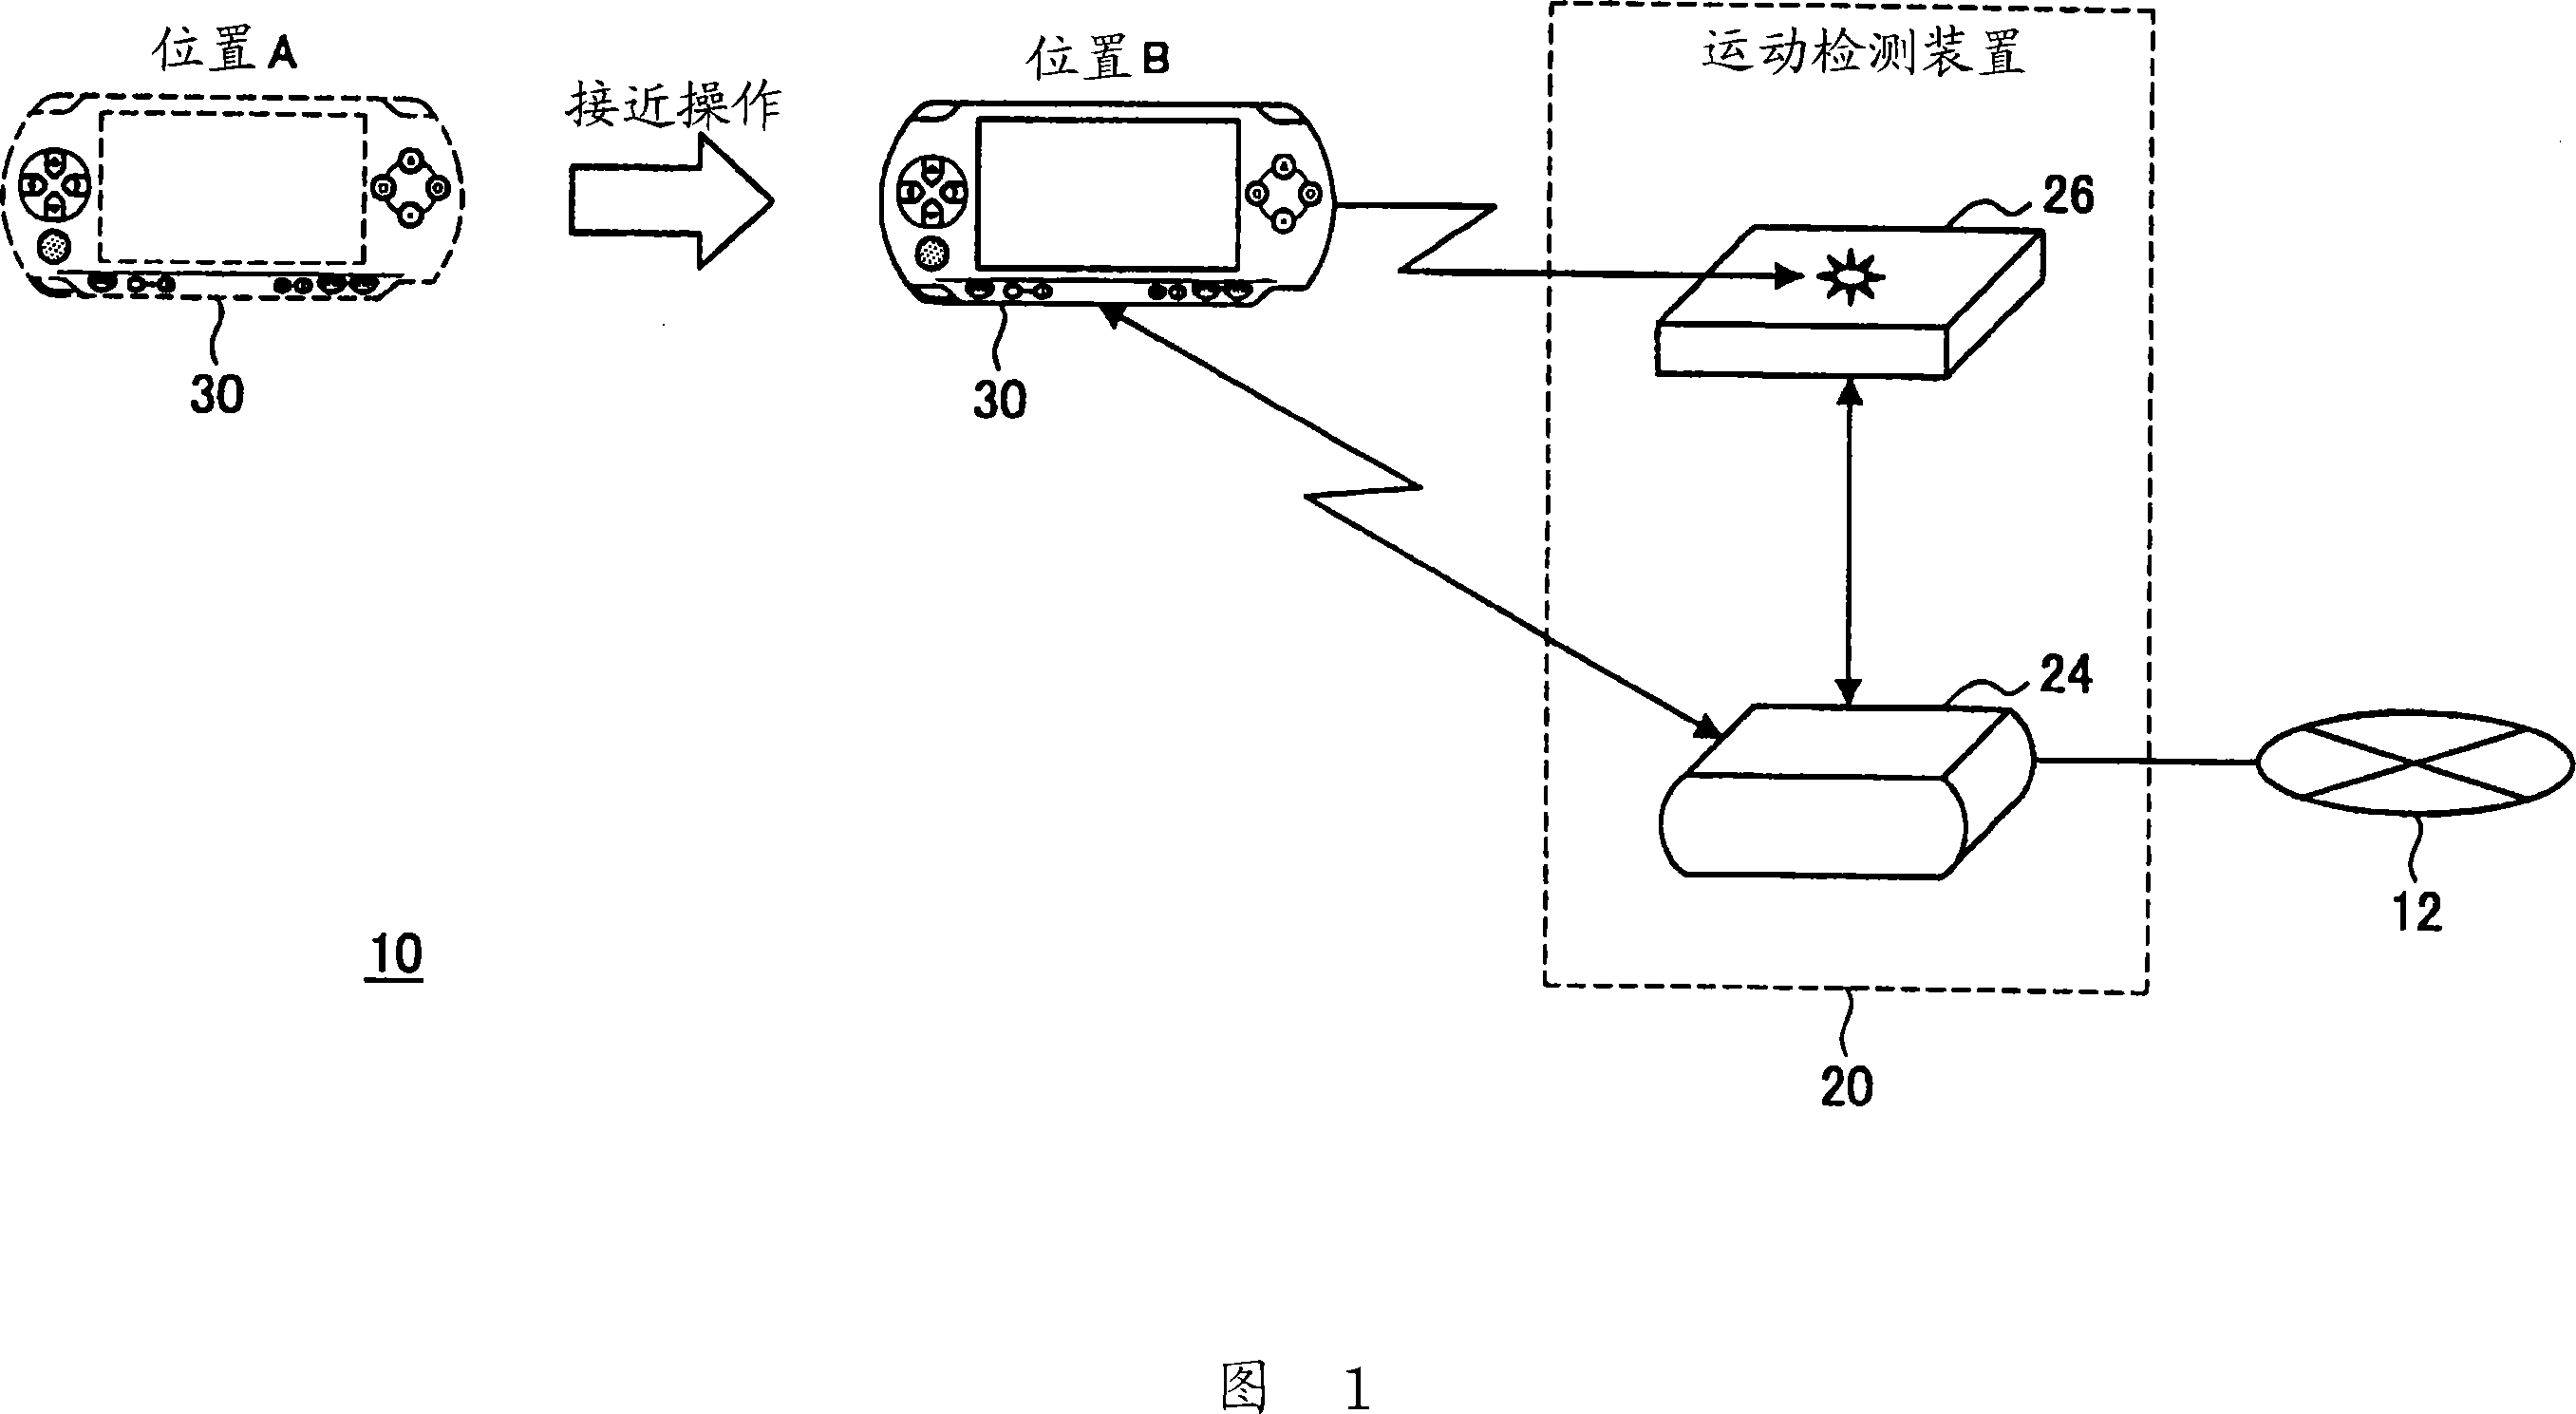 Movement detection system, movement detection device, movement detection method and computer program